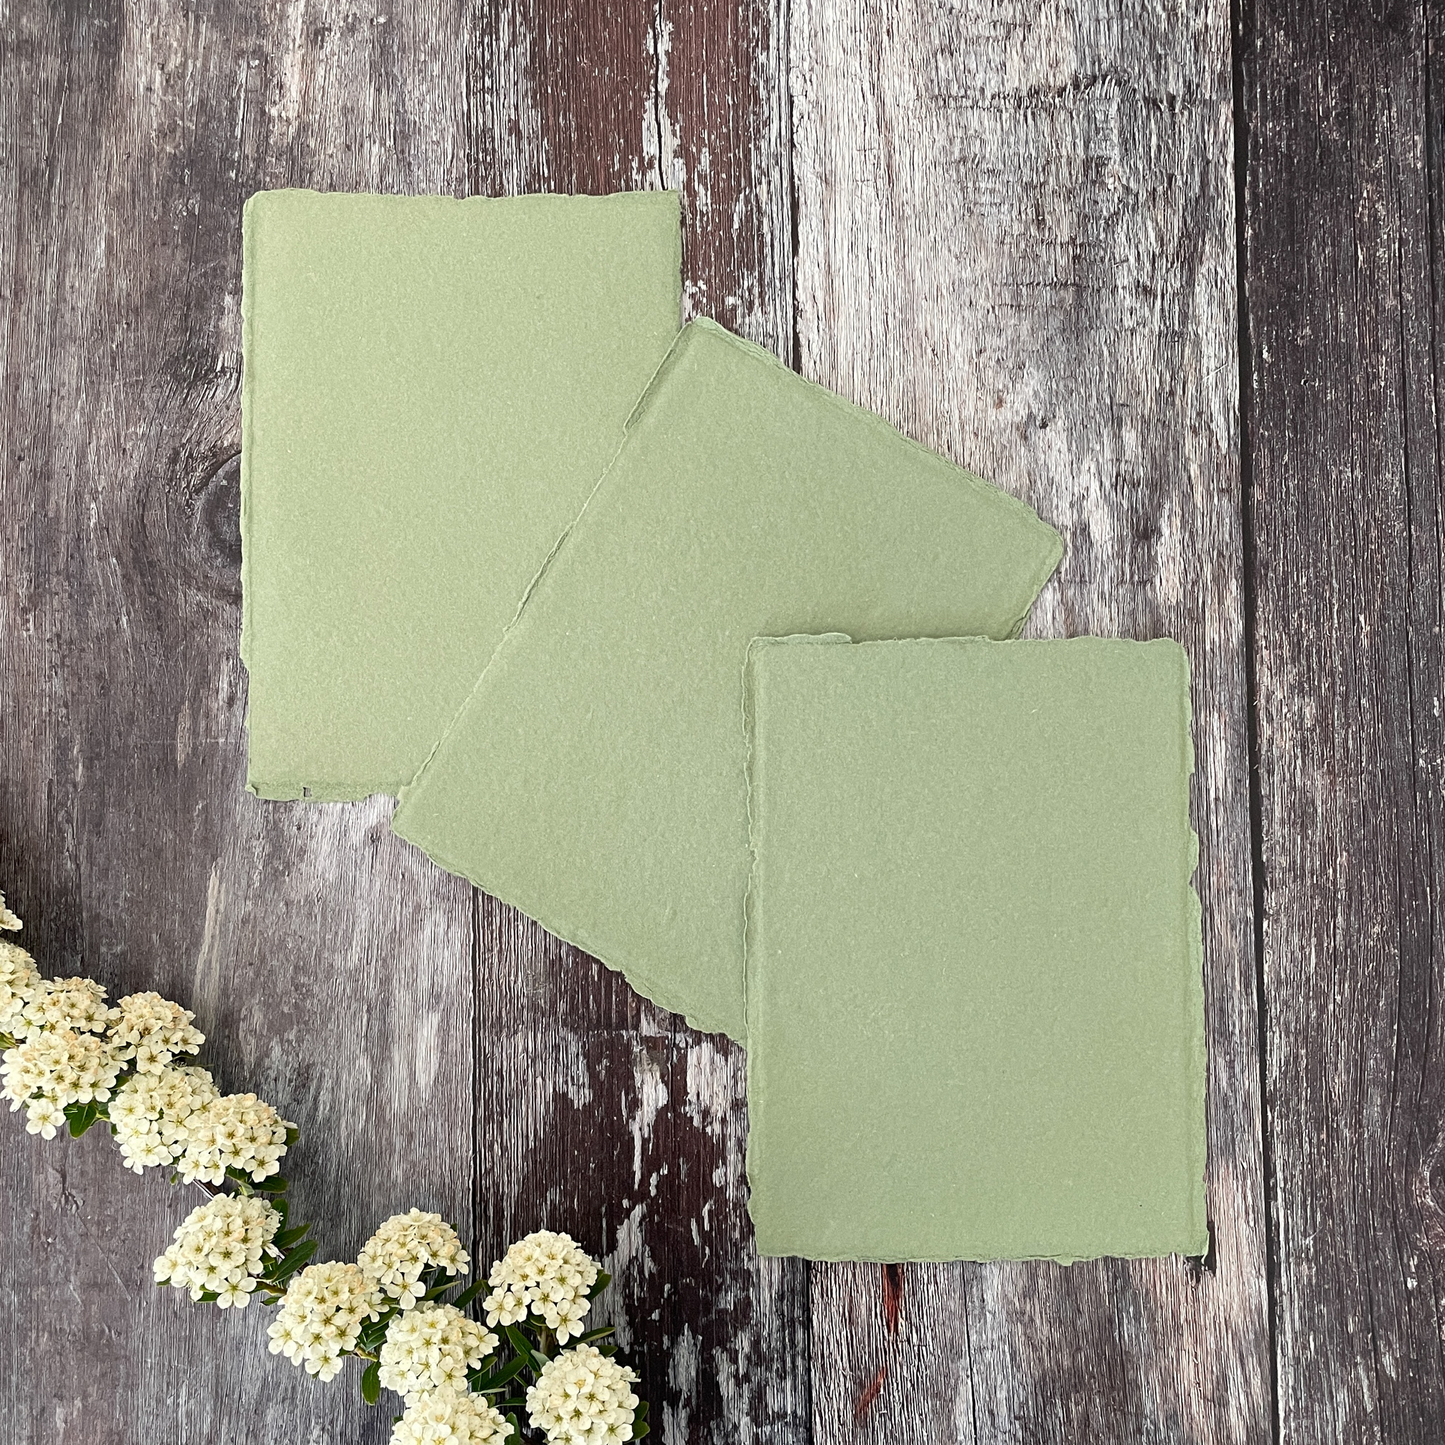 Sage green Handmade paper with a deckled edge.   Recycled cotton rag paper By The Natural Paper Company